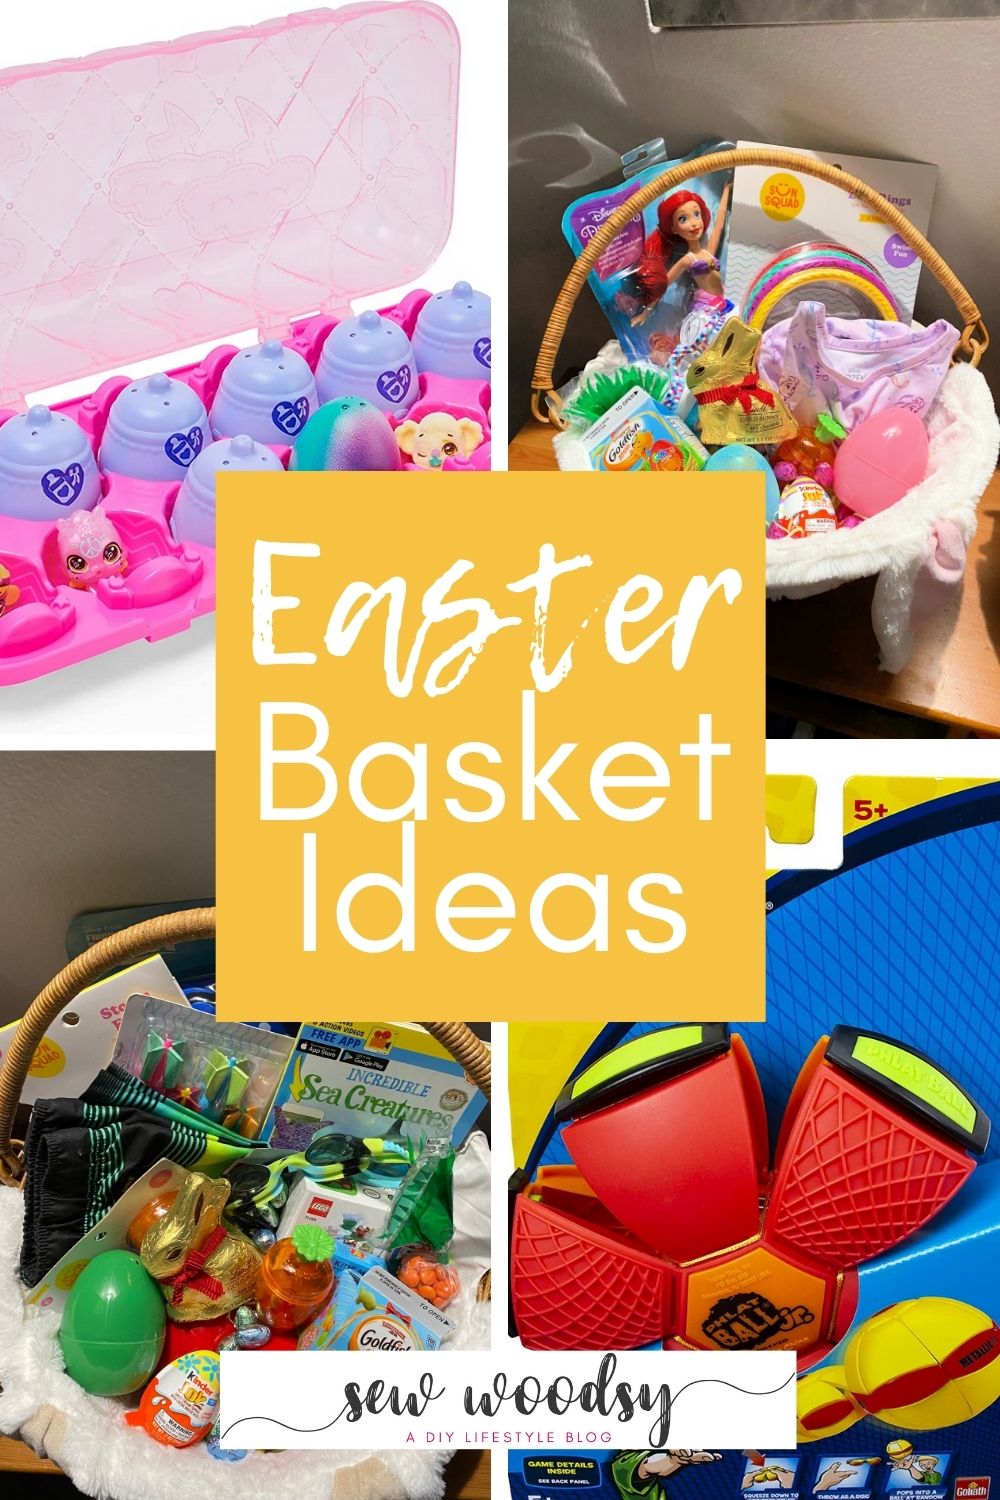 Four photos of Easter basket items with text on image for Pinterest.